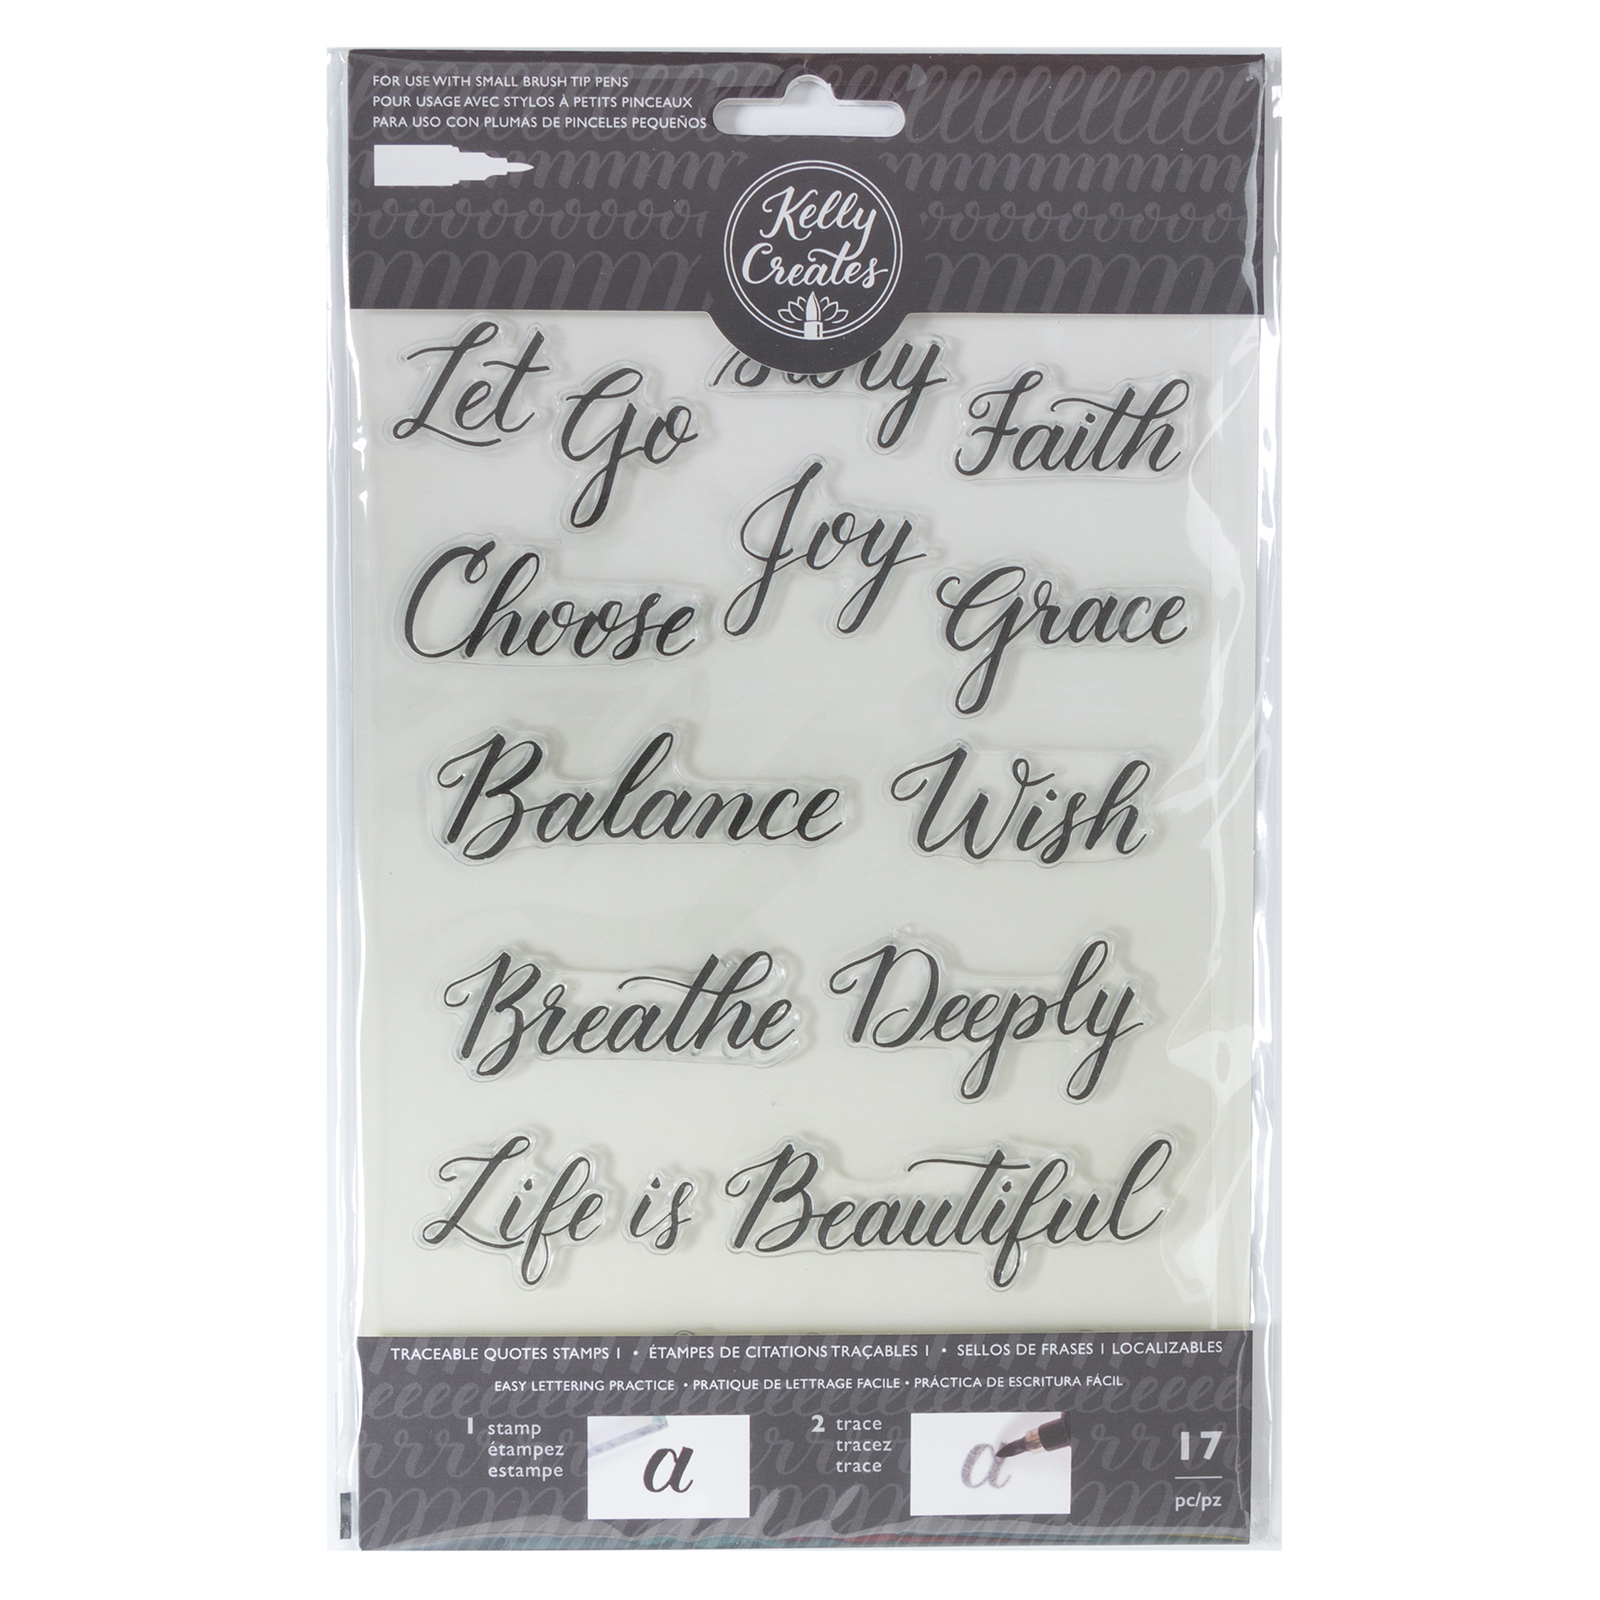 Kelly Creates Traceable Stamp Set - Quotes 1 by American Crafts